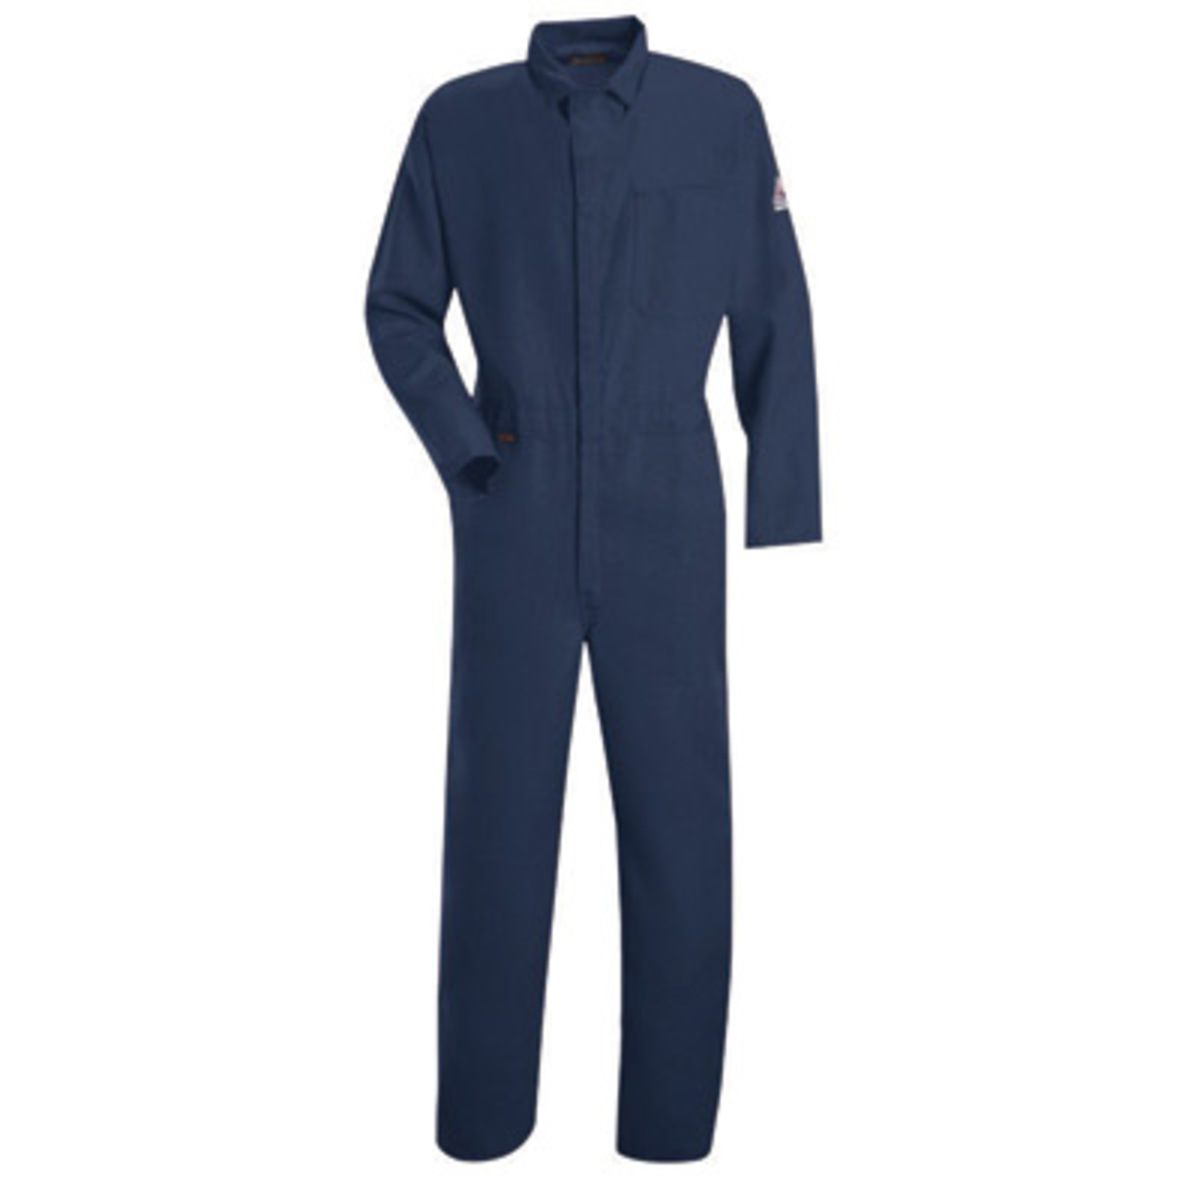 Stanco Safety Products™ 3X Navy Blue Nomex® IIIA Arc Rated Flame Resistant Coveralls With Concealed 2-Way Front Zipper Closure A